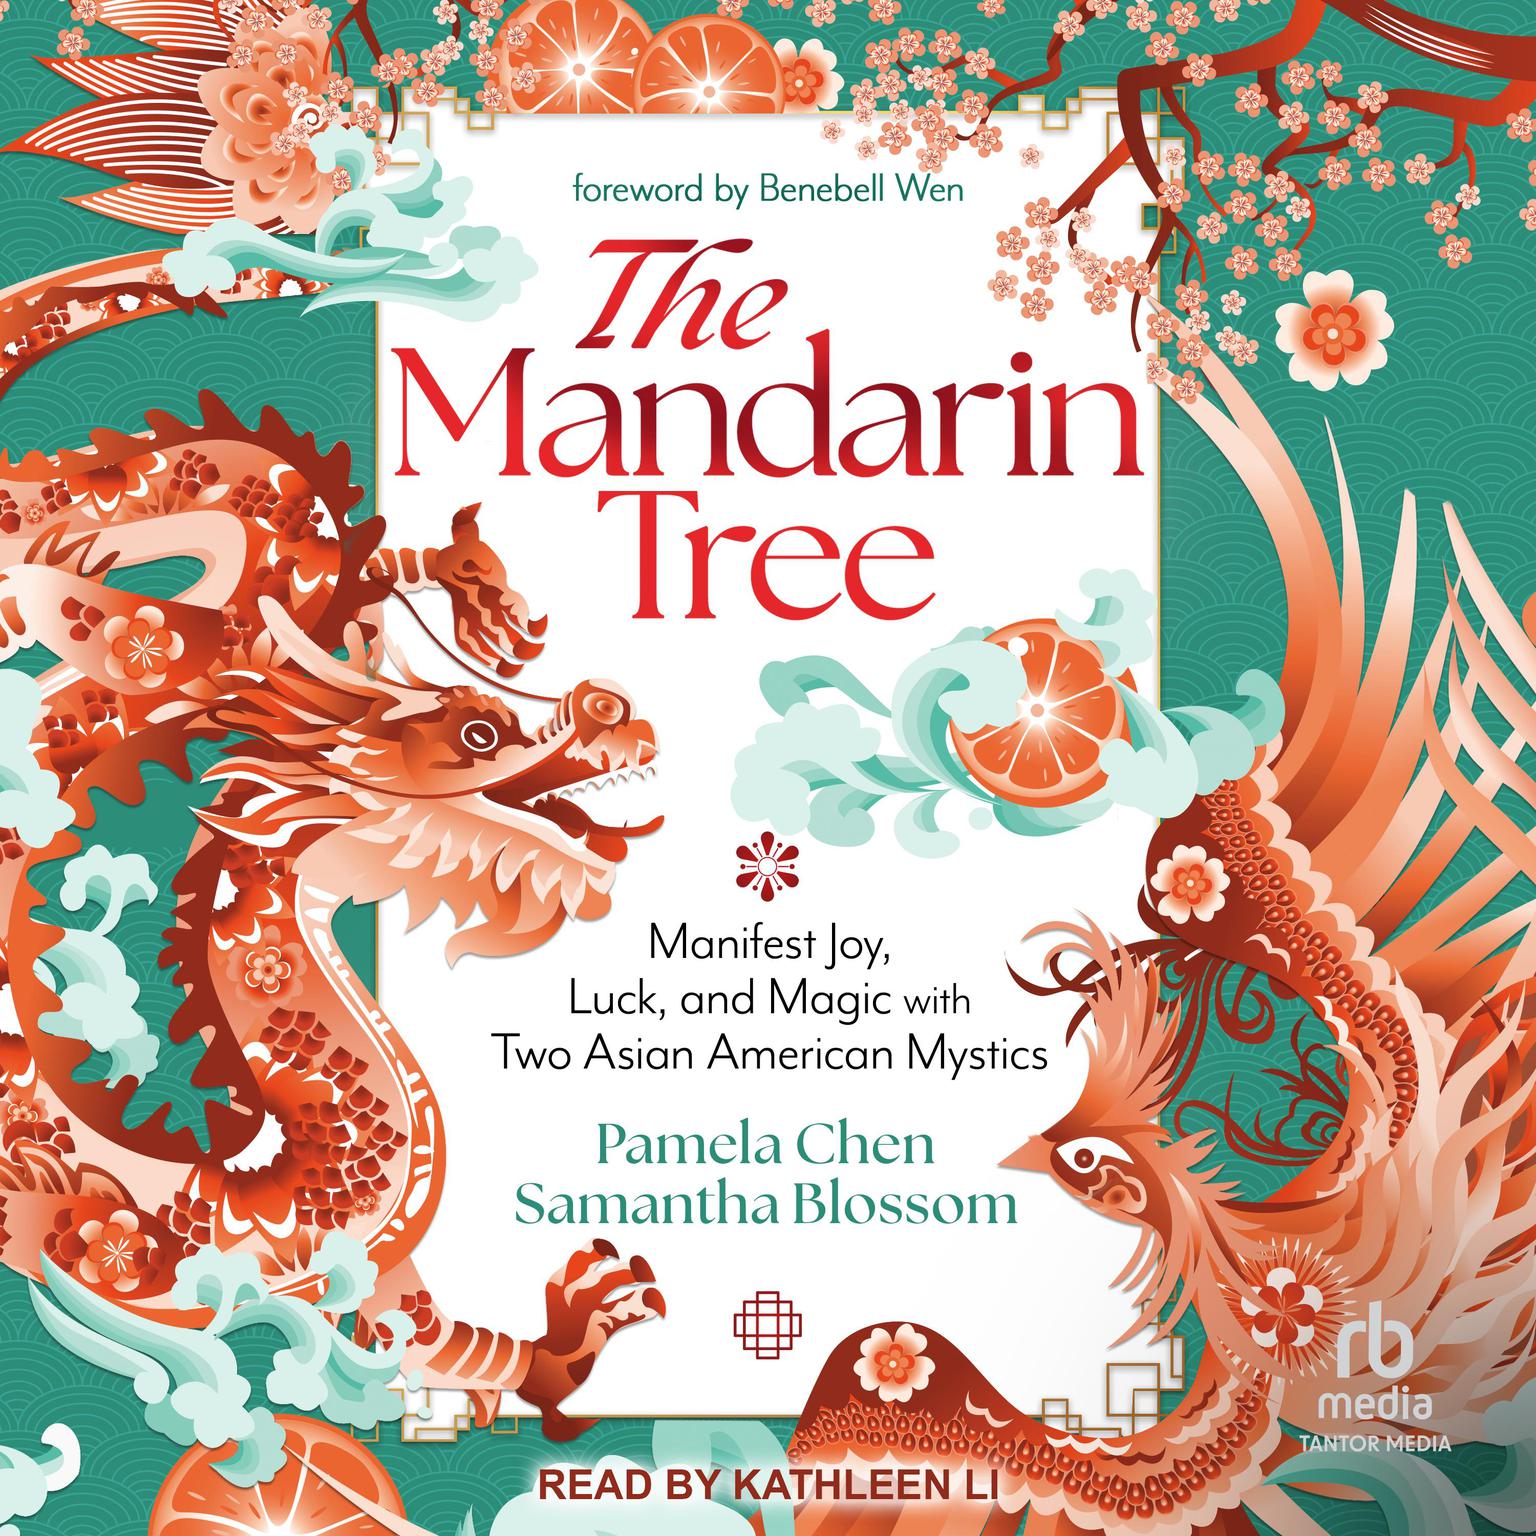 The Mandarin Tree: Manifest Joy, Luck, and Magic with Two Asian American Mystics Audiobook, by Pamela Chen